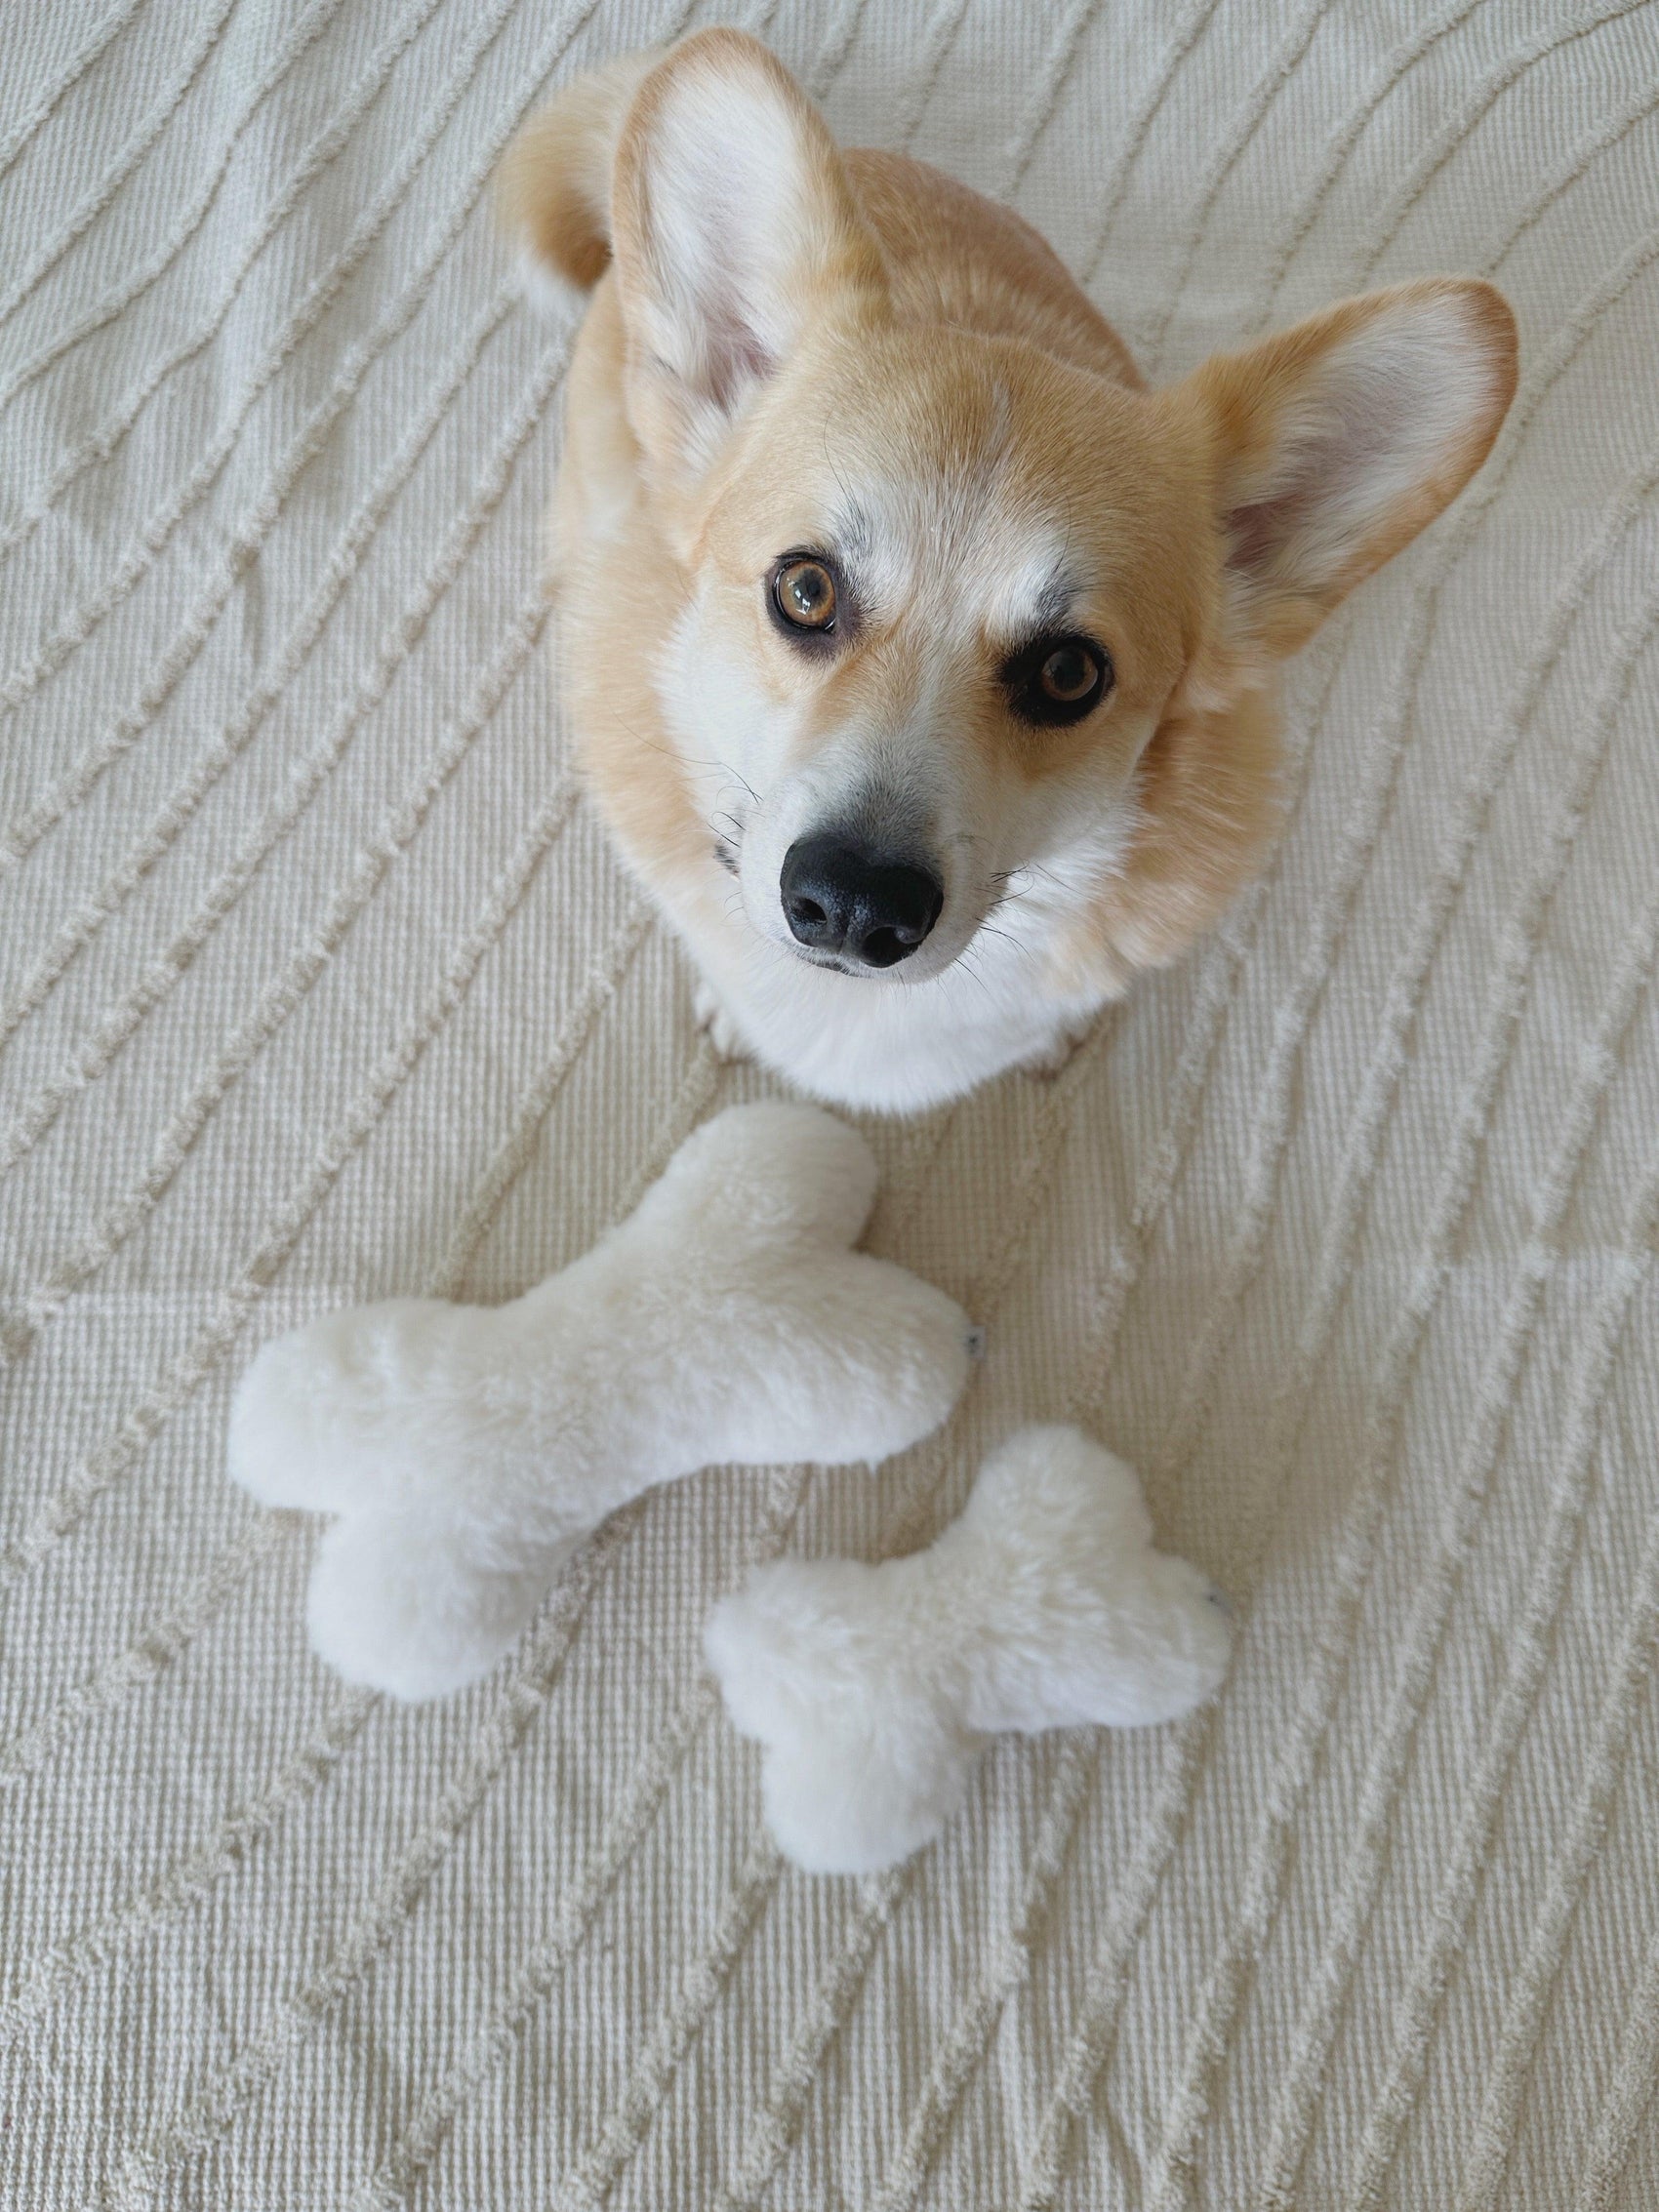 A corgi standing next to a white Natural Sheepskin Dog Toy Bone from Mellow Pet Store, a sustainable dog toy.